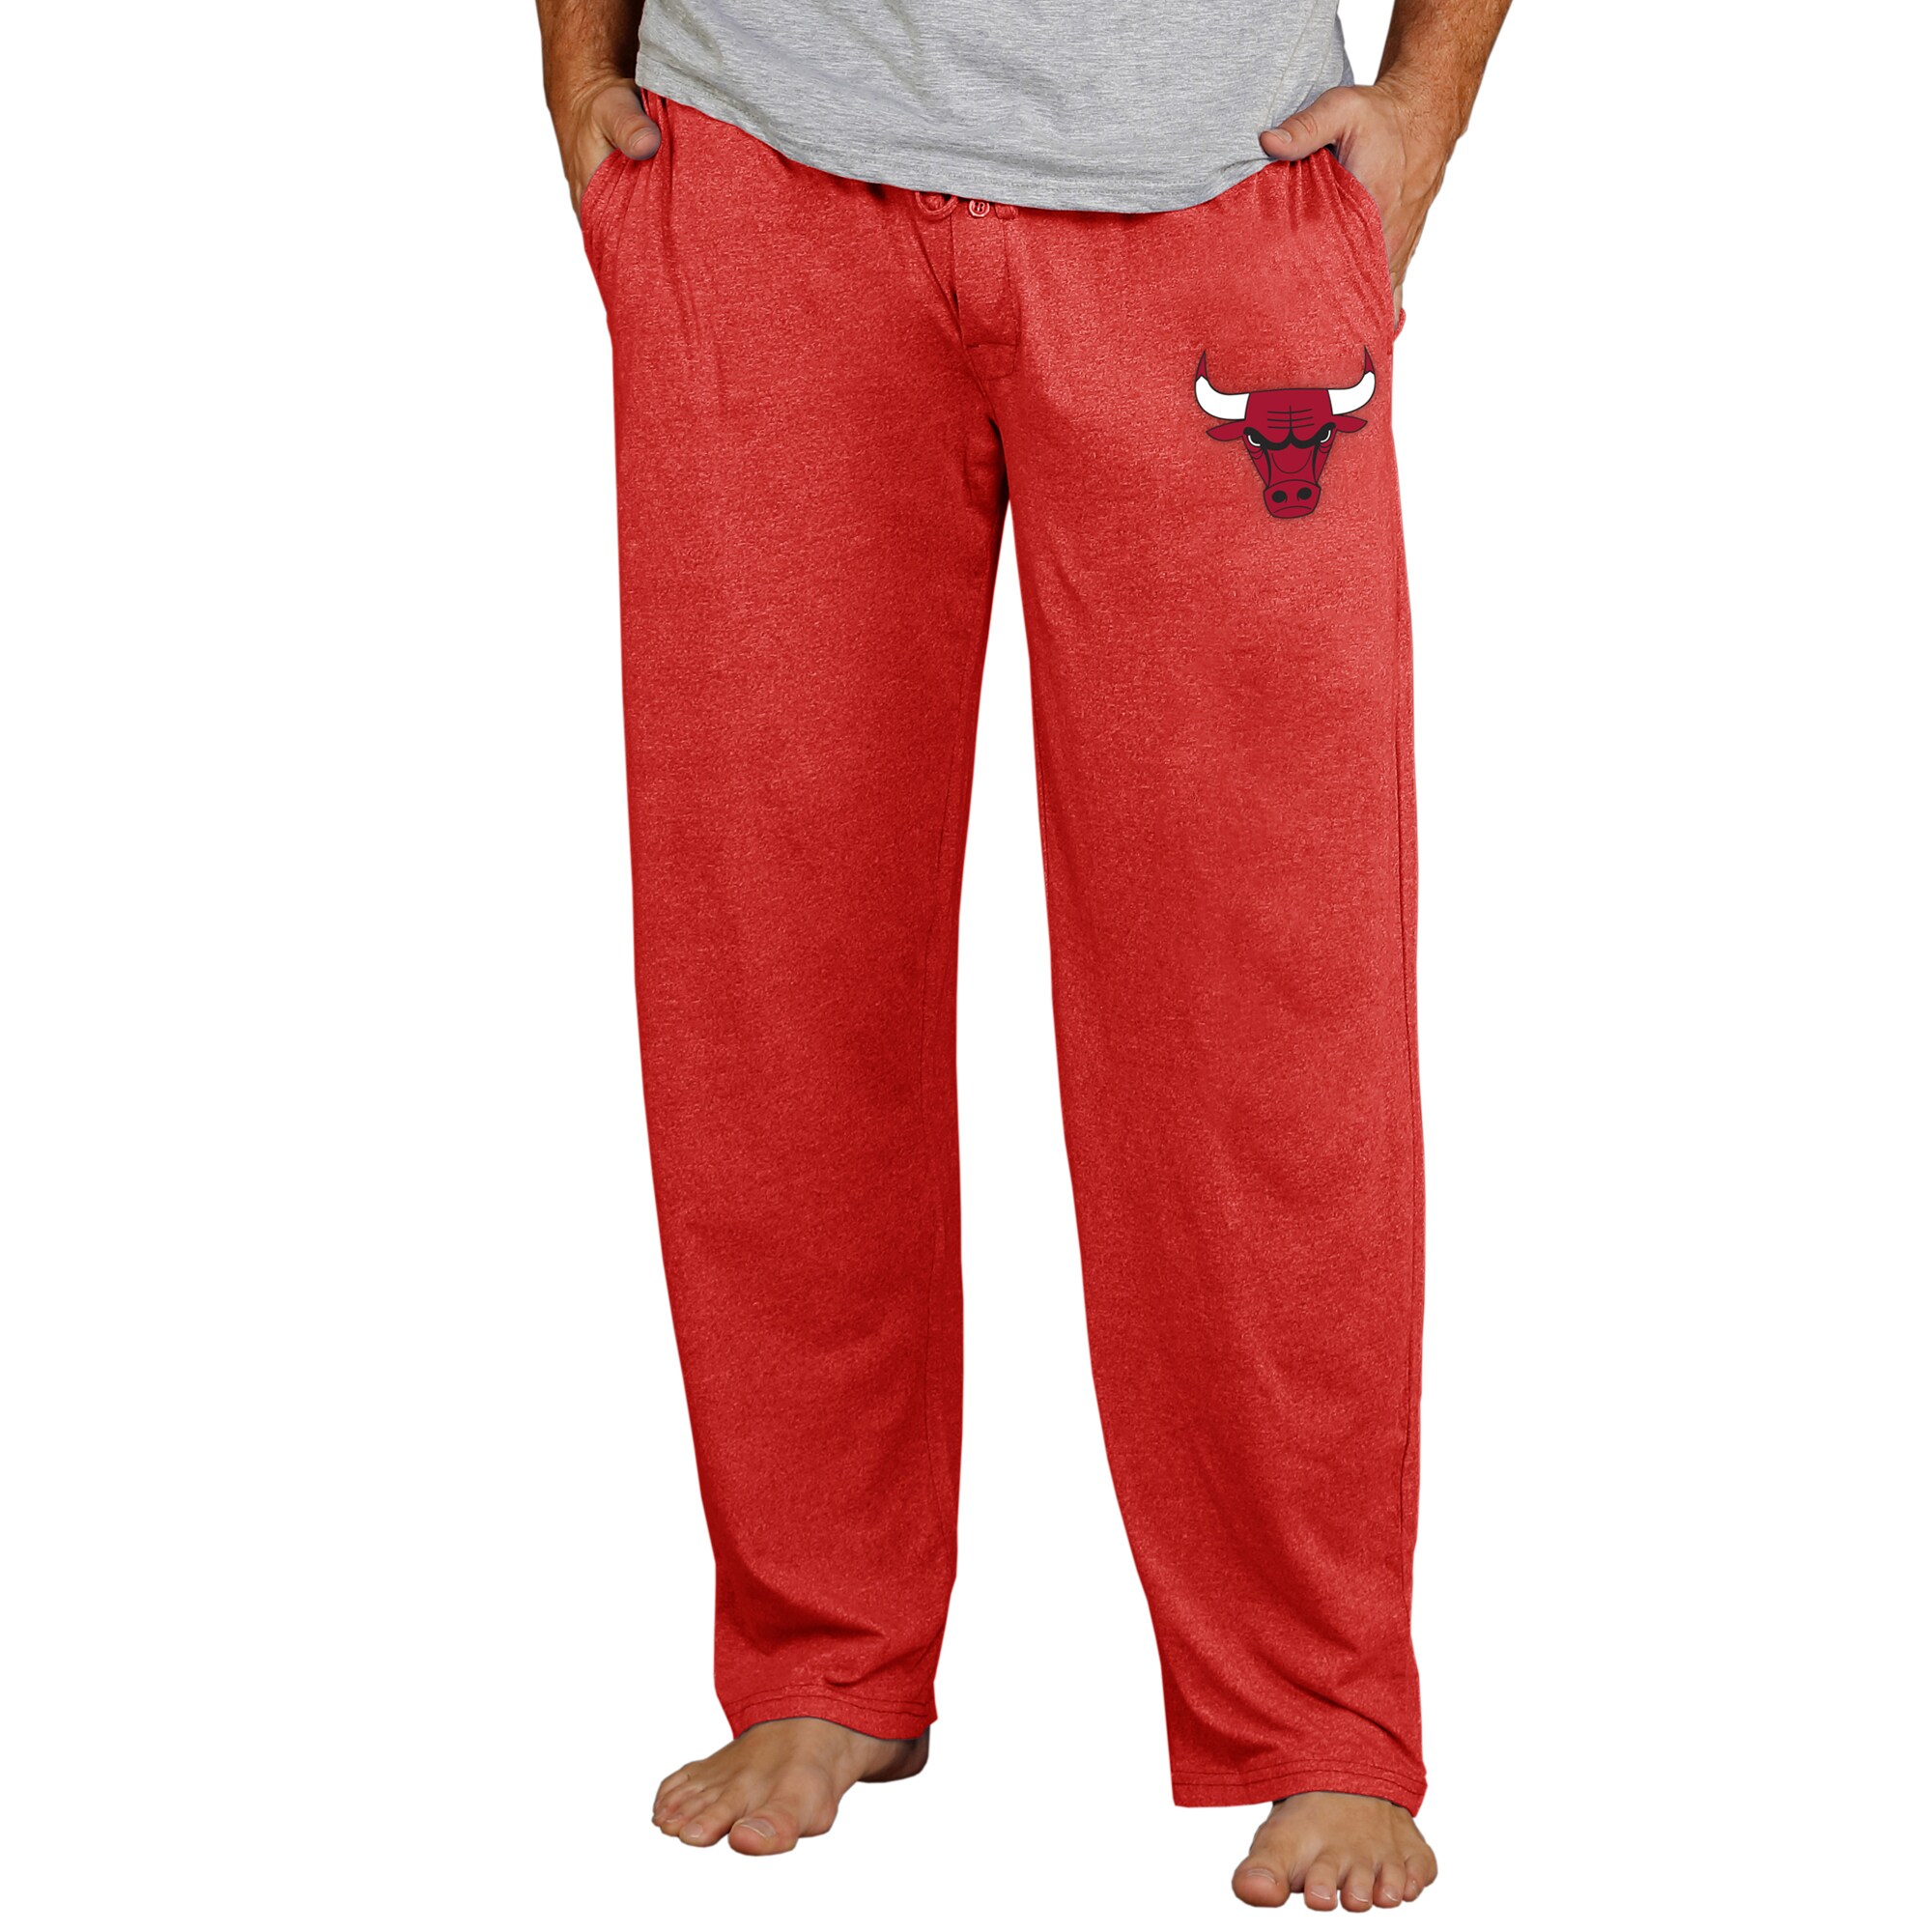 Men's Concepts Sport Red Chicago Bulls Quest Knit Lounge Pants - image 1 of 1